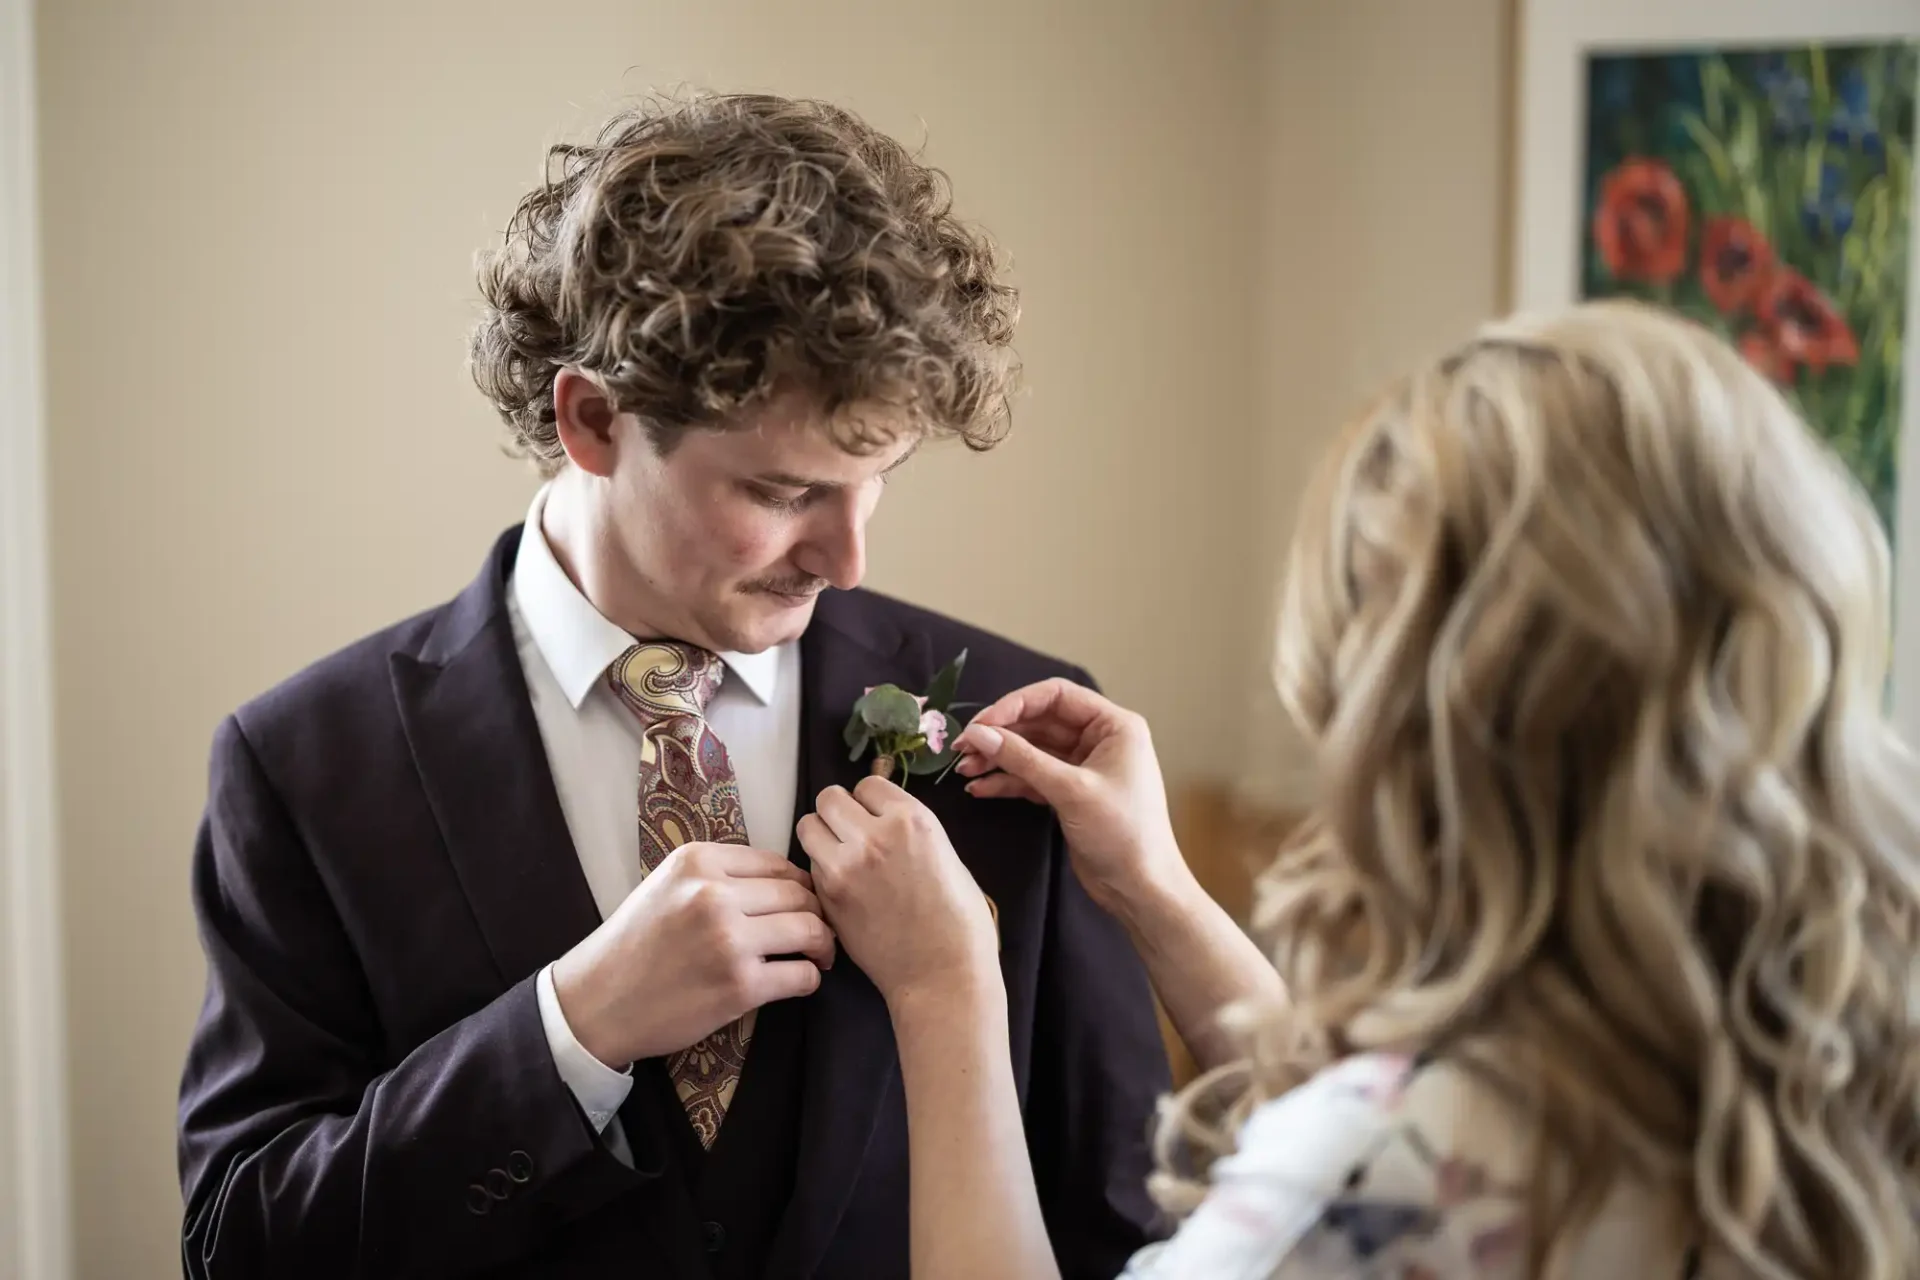 A woman pins a boutonniere on a man's suit lapel as they prepare for a formal event.